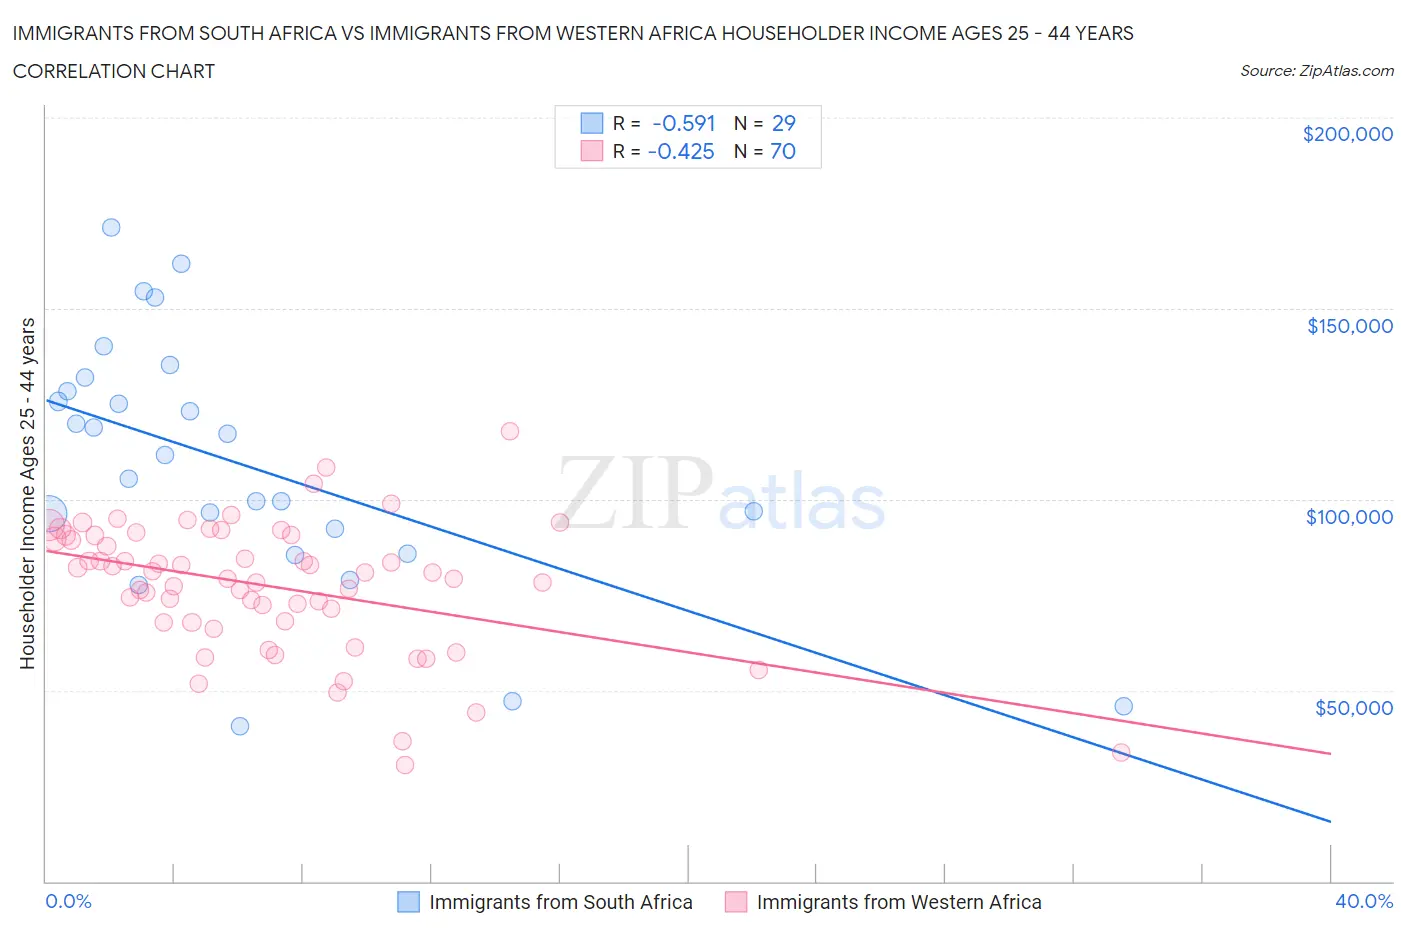 Immigrants from South Africa vs Immigrants from Western Africa Householder Income Ages 25 - 44 years